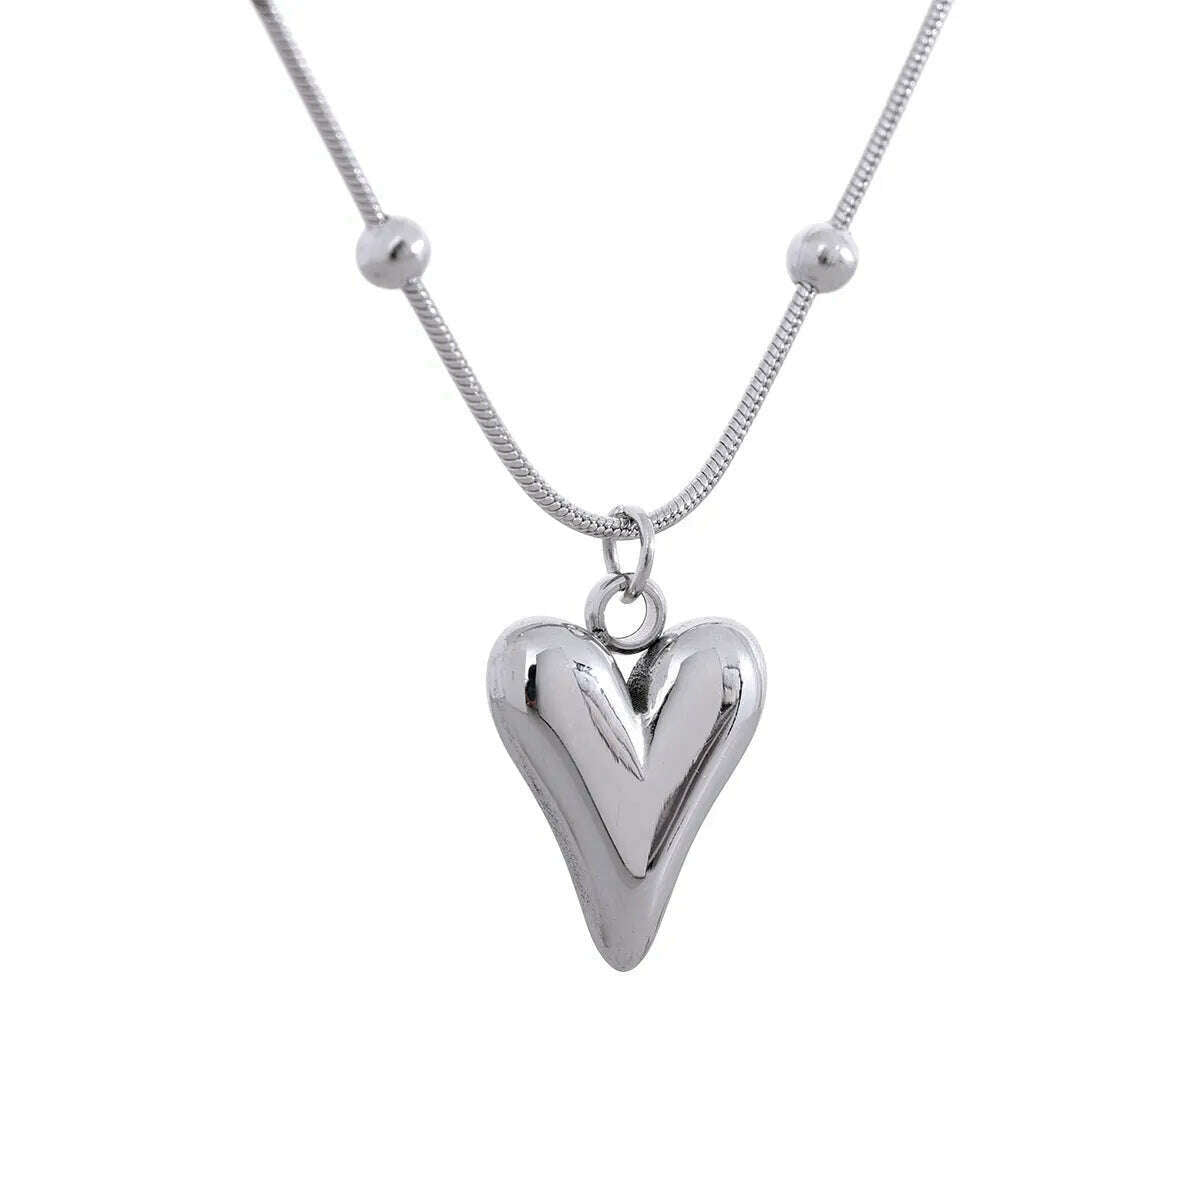 KIMLUD, Yhpup Temperament Heart Pendant Chain Necklace for Women Stainless Steel Stylish Choker 18 K Jewelry Waterproof Party Gift, YH1594A Steel, KIMLUD Womens Clothes